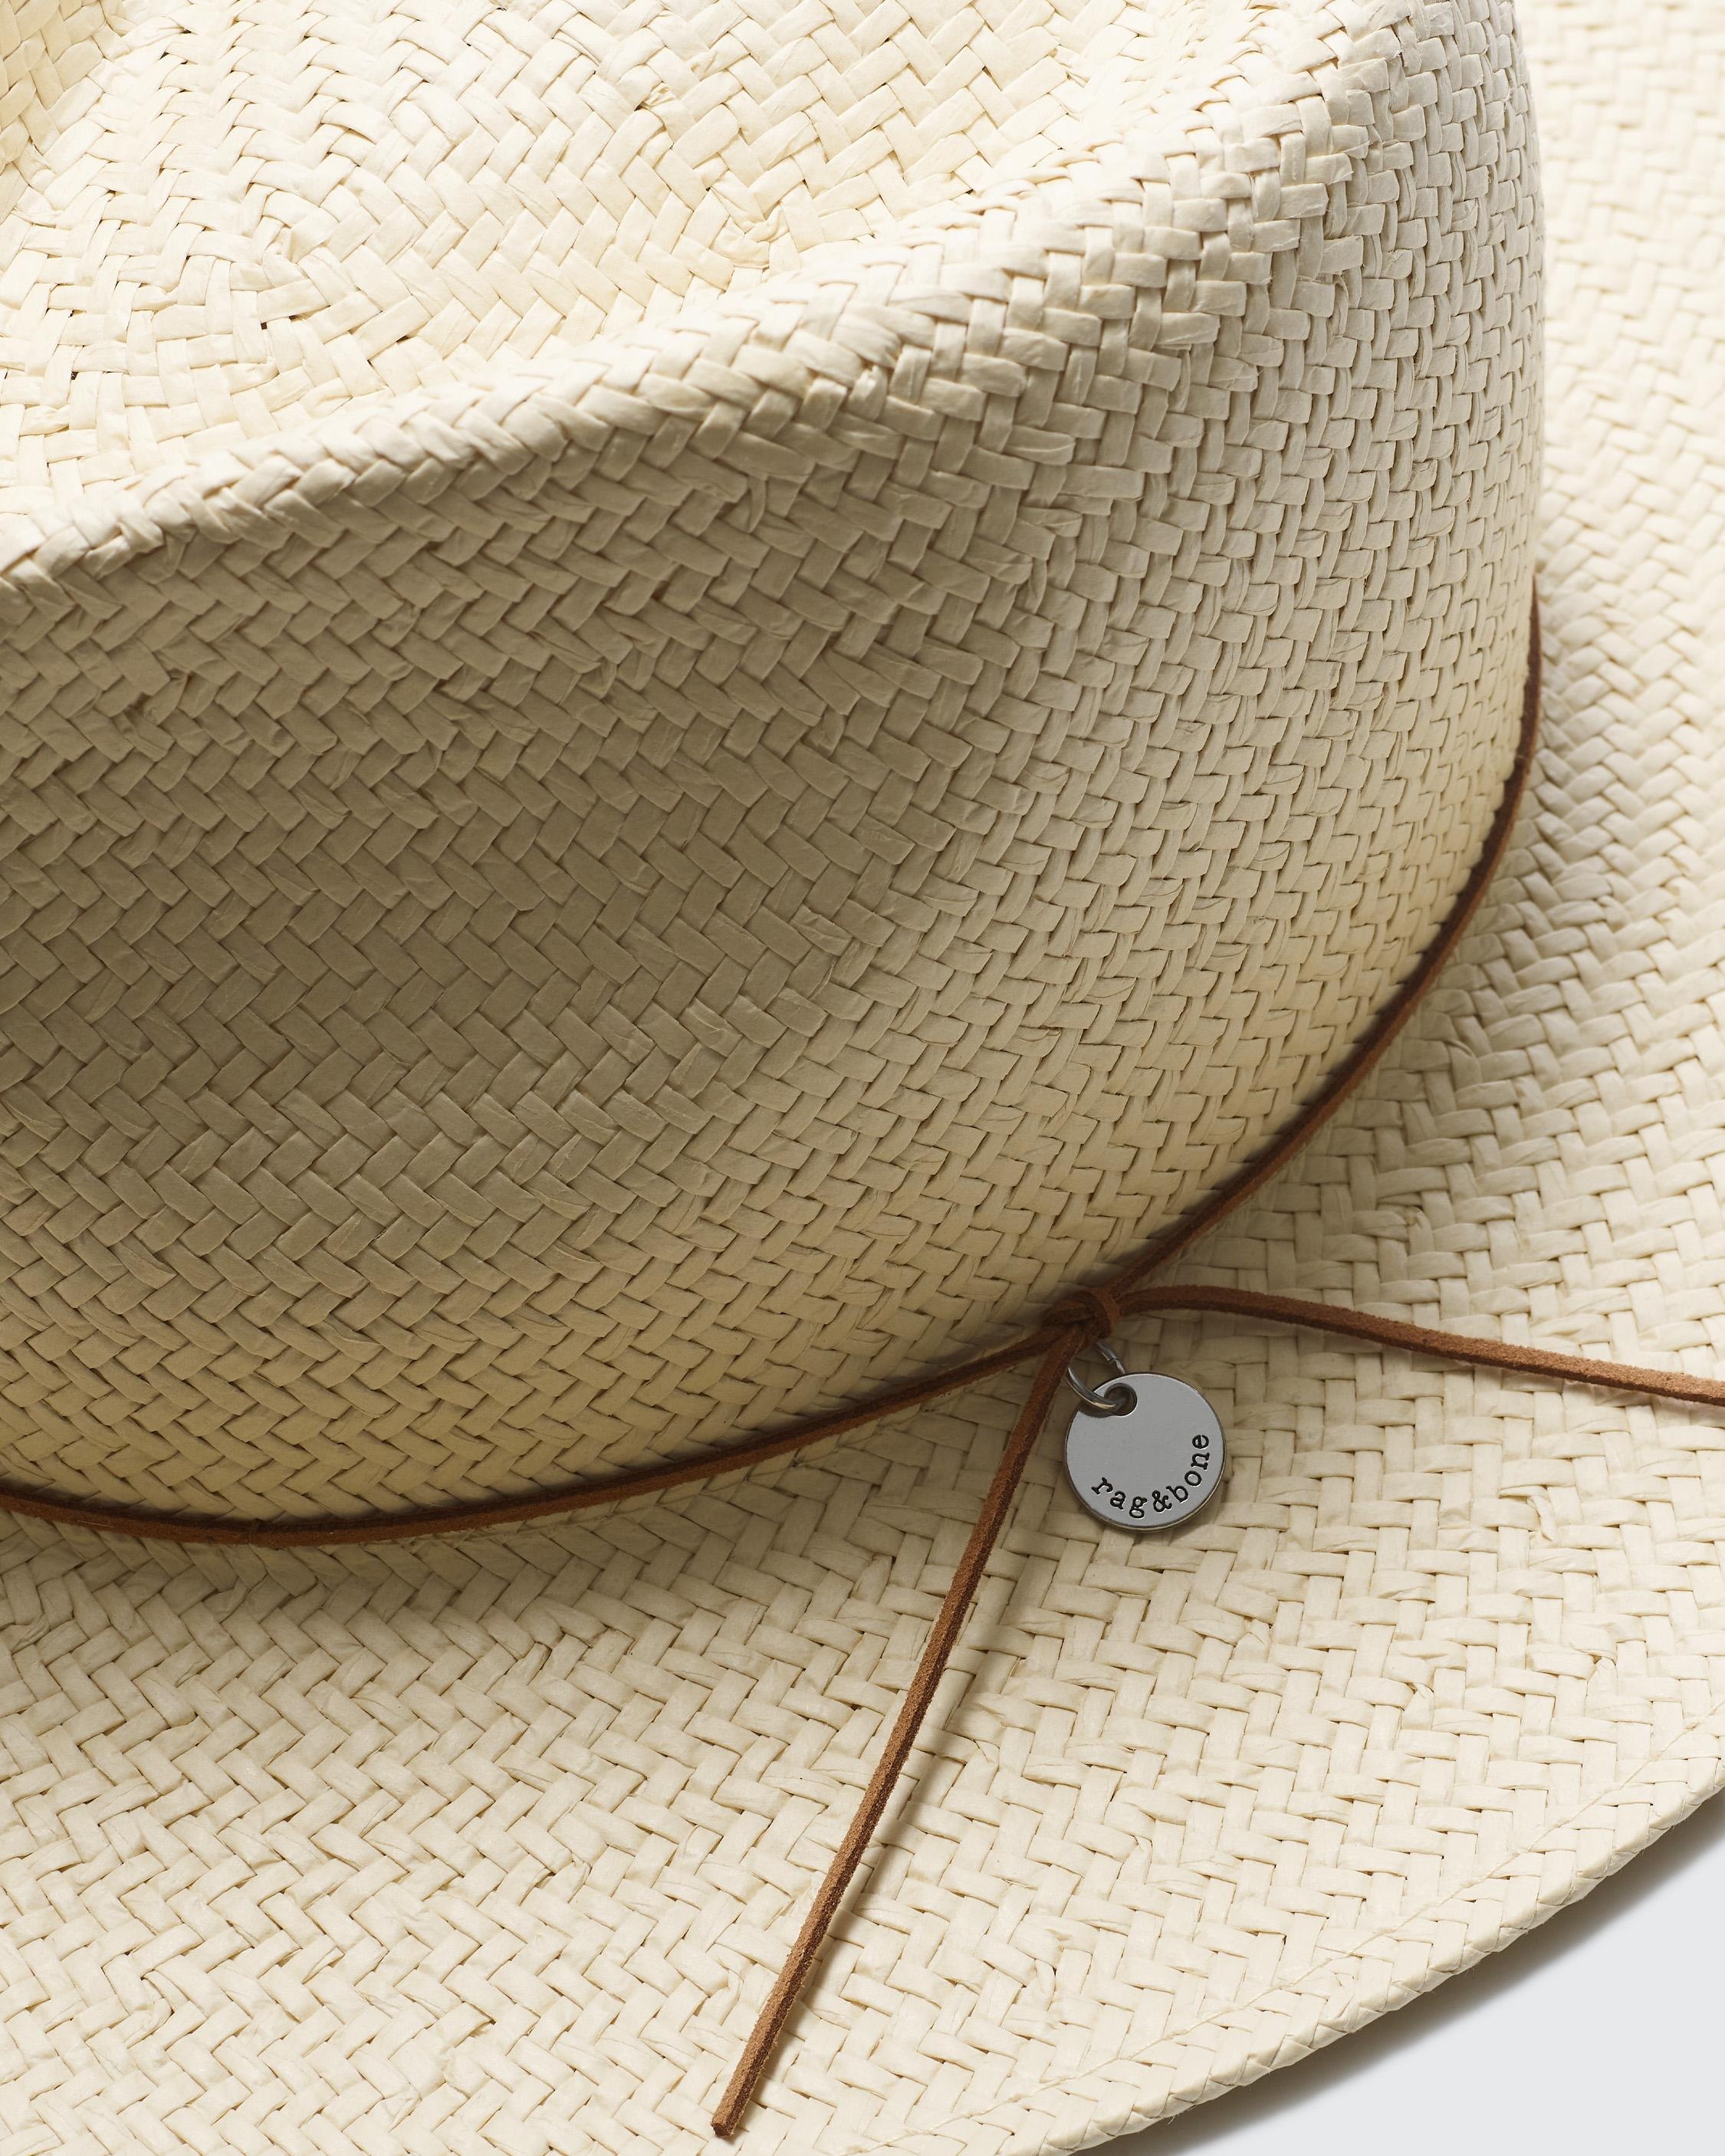 Packable Fedora
Straw Hat - 4